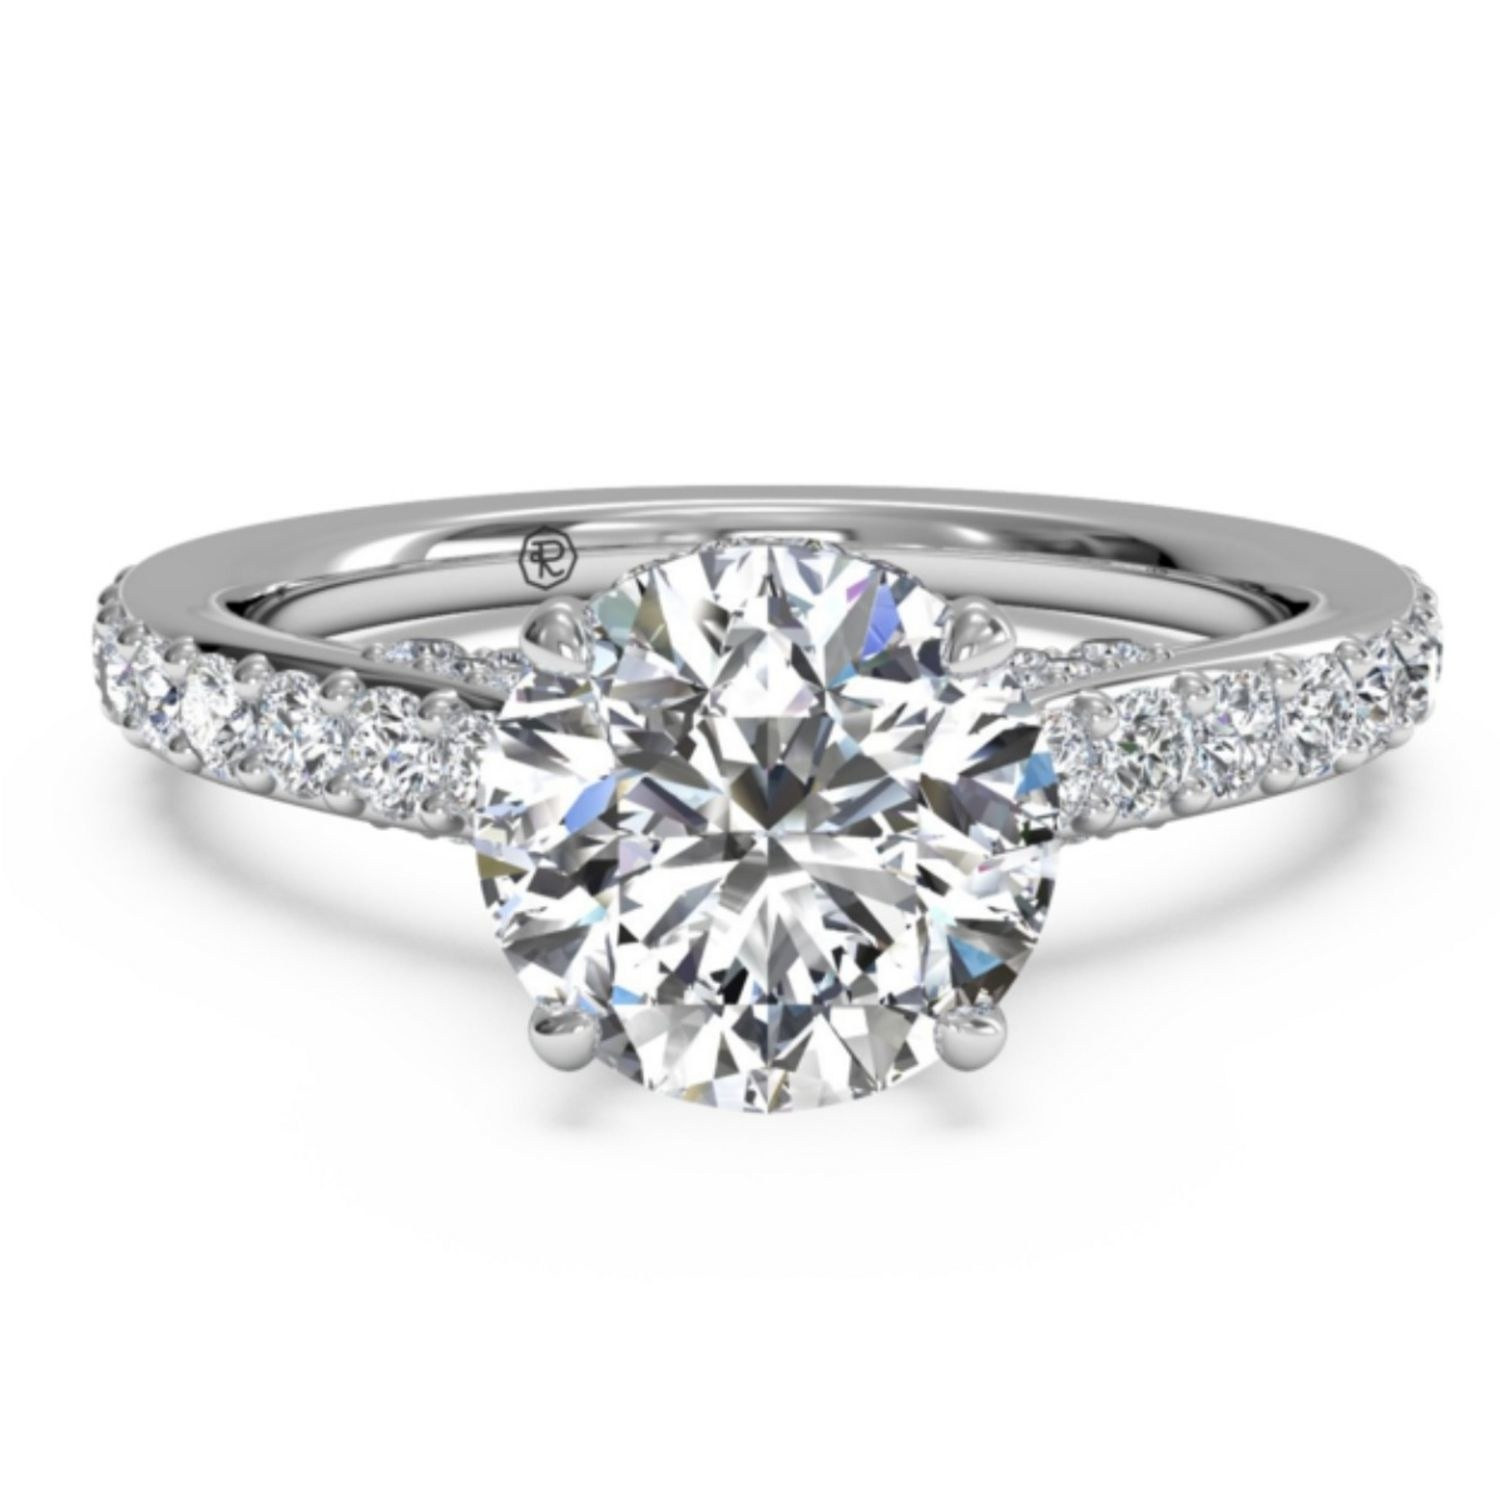 Popular Wedding Rings
 The 5 Most Popular Engagement Rings of 2013 Which Styles